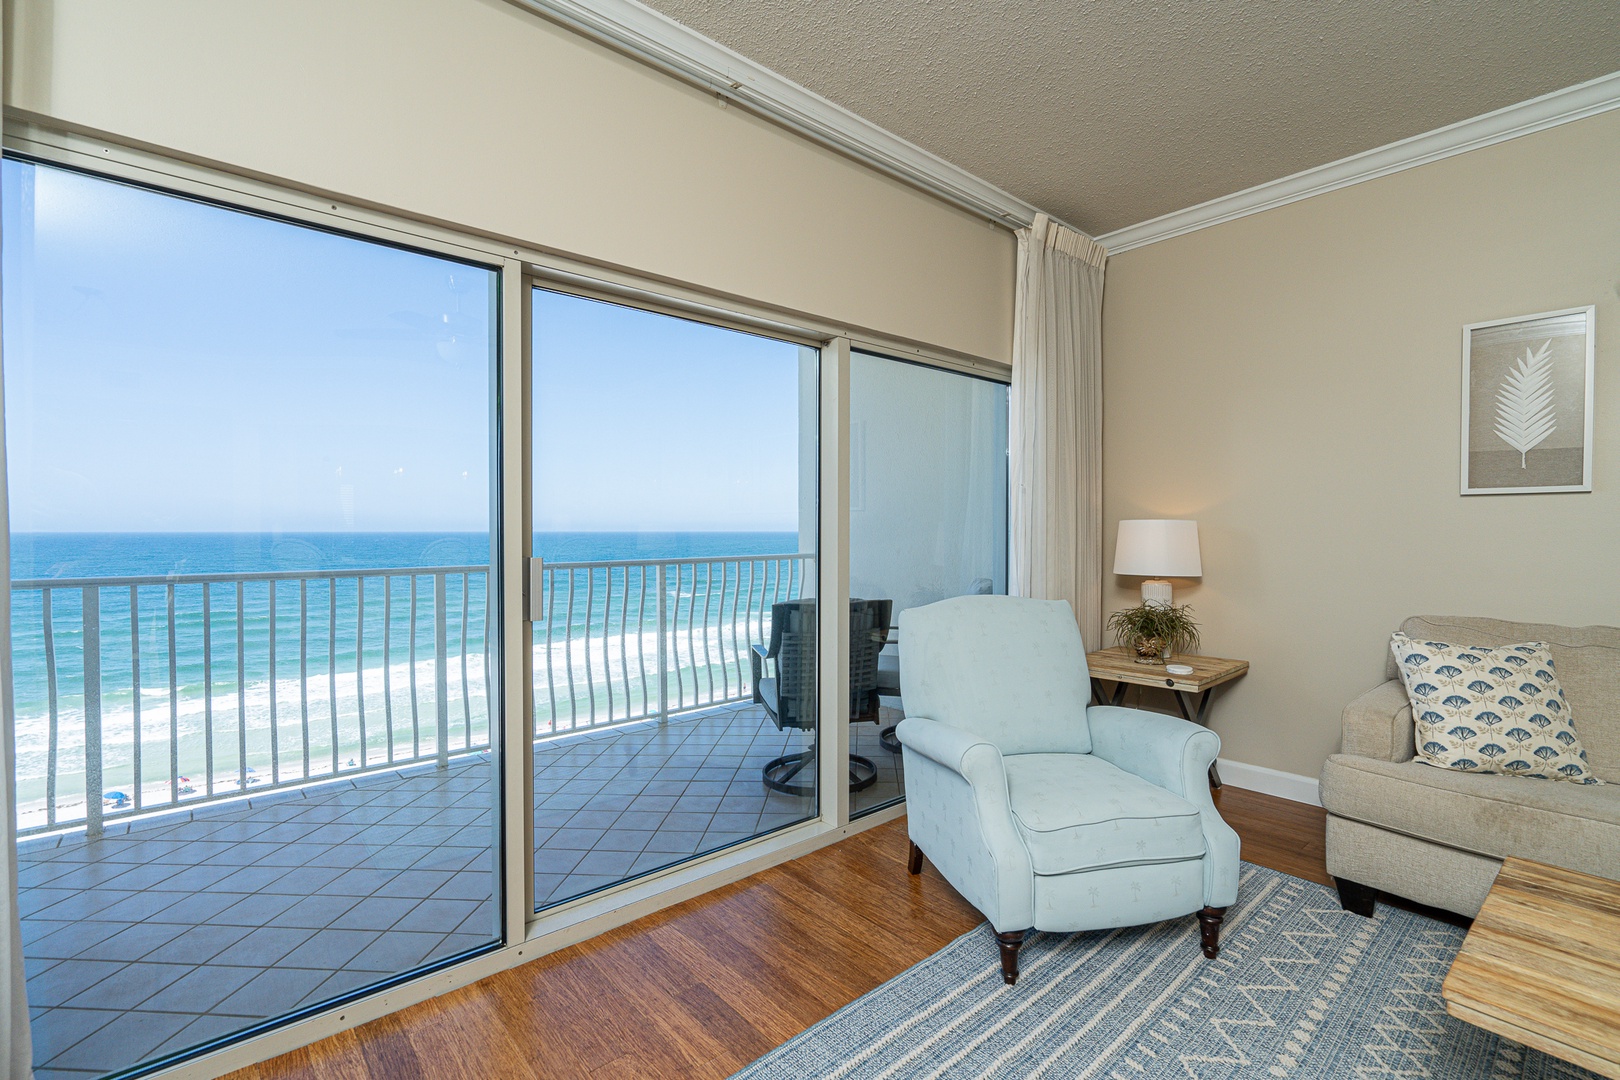 Curl up in the coastal living room & enjoy the view or a movie night at home